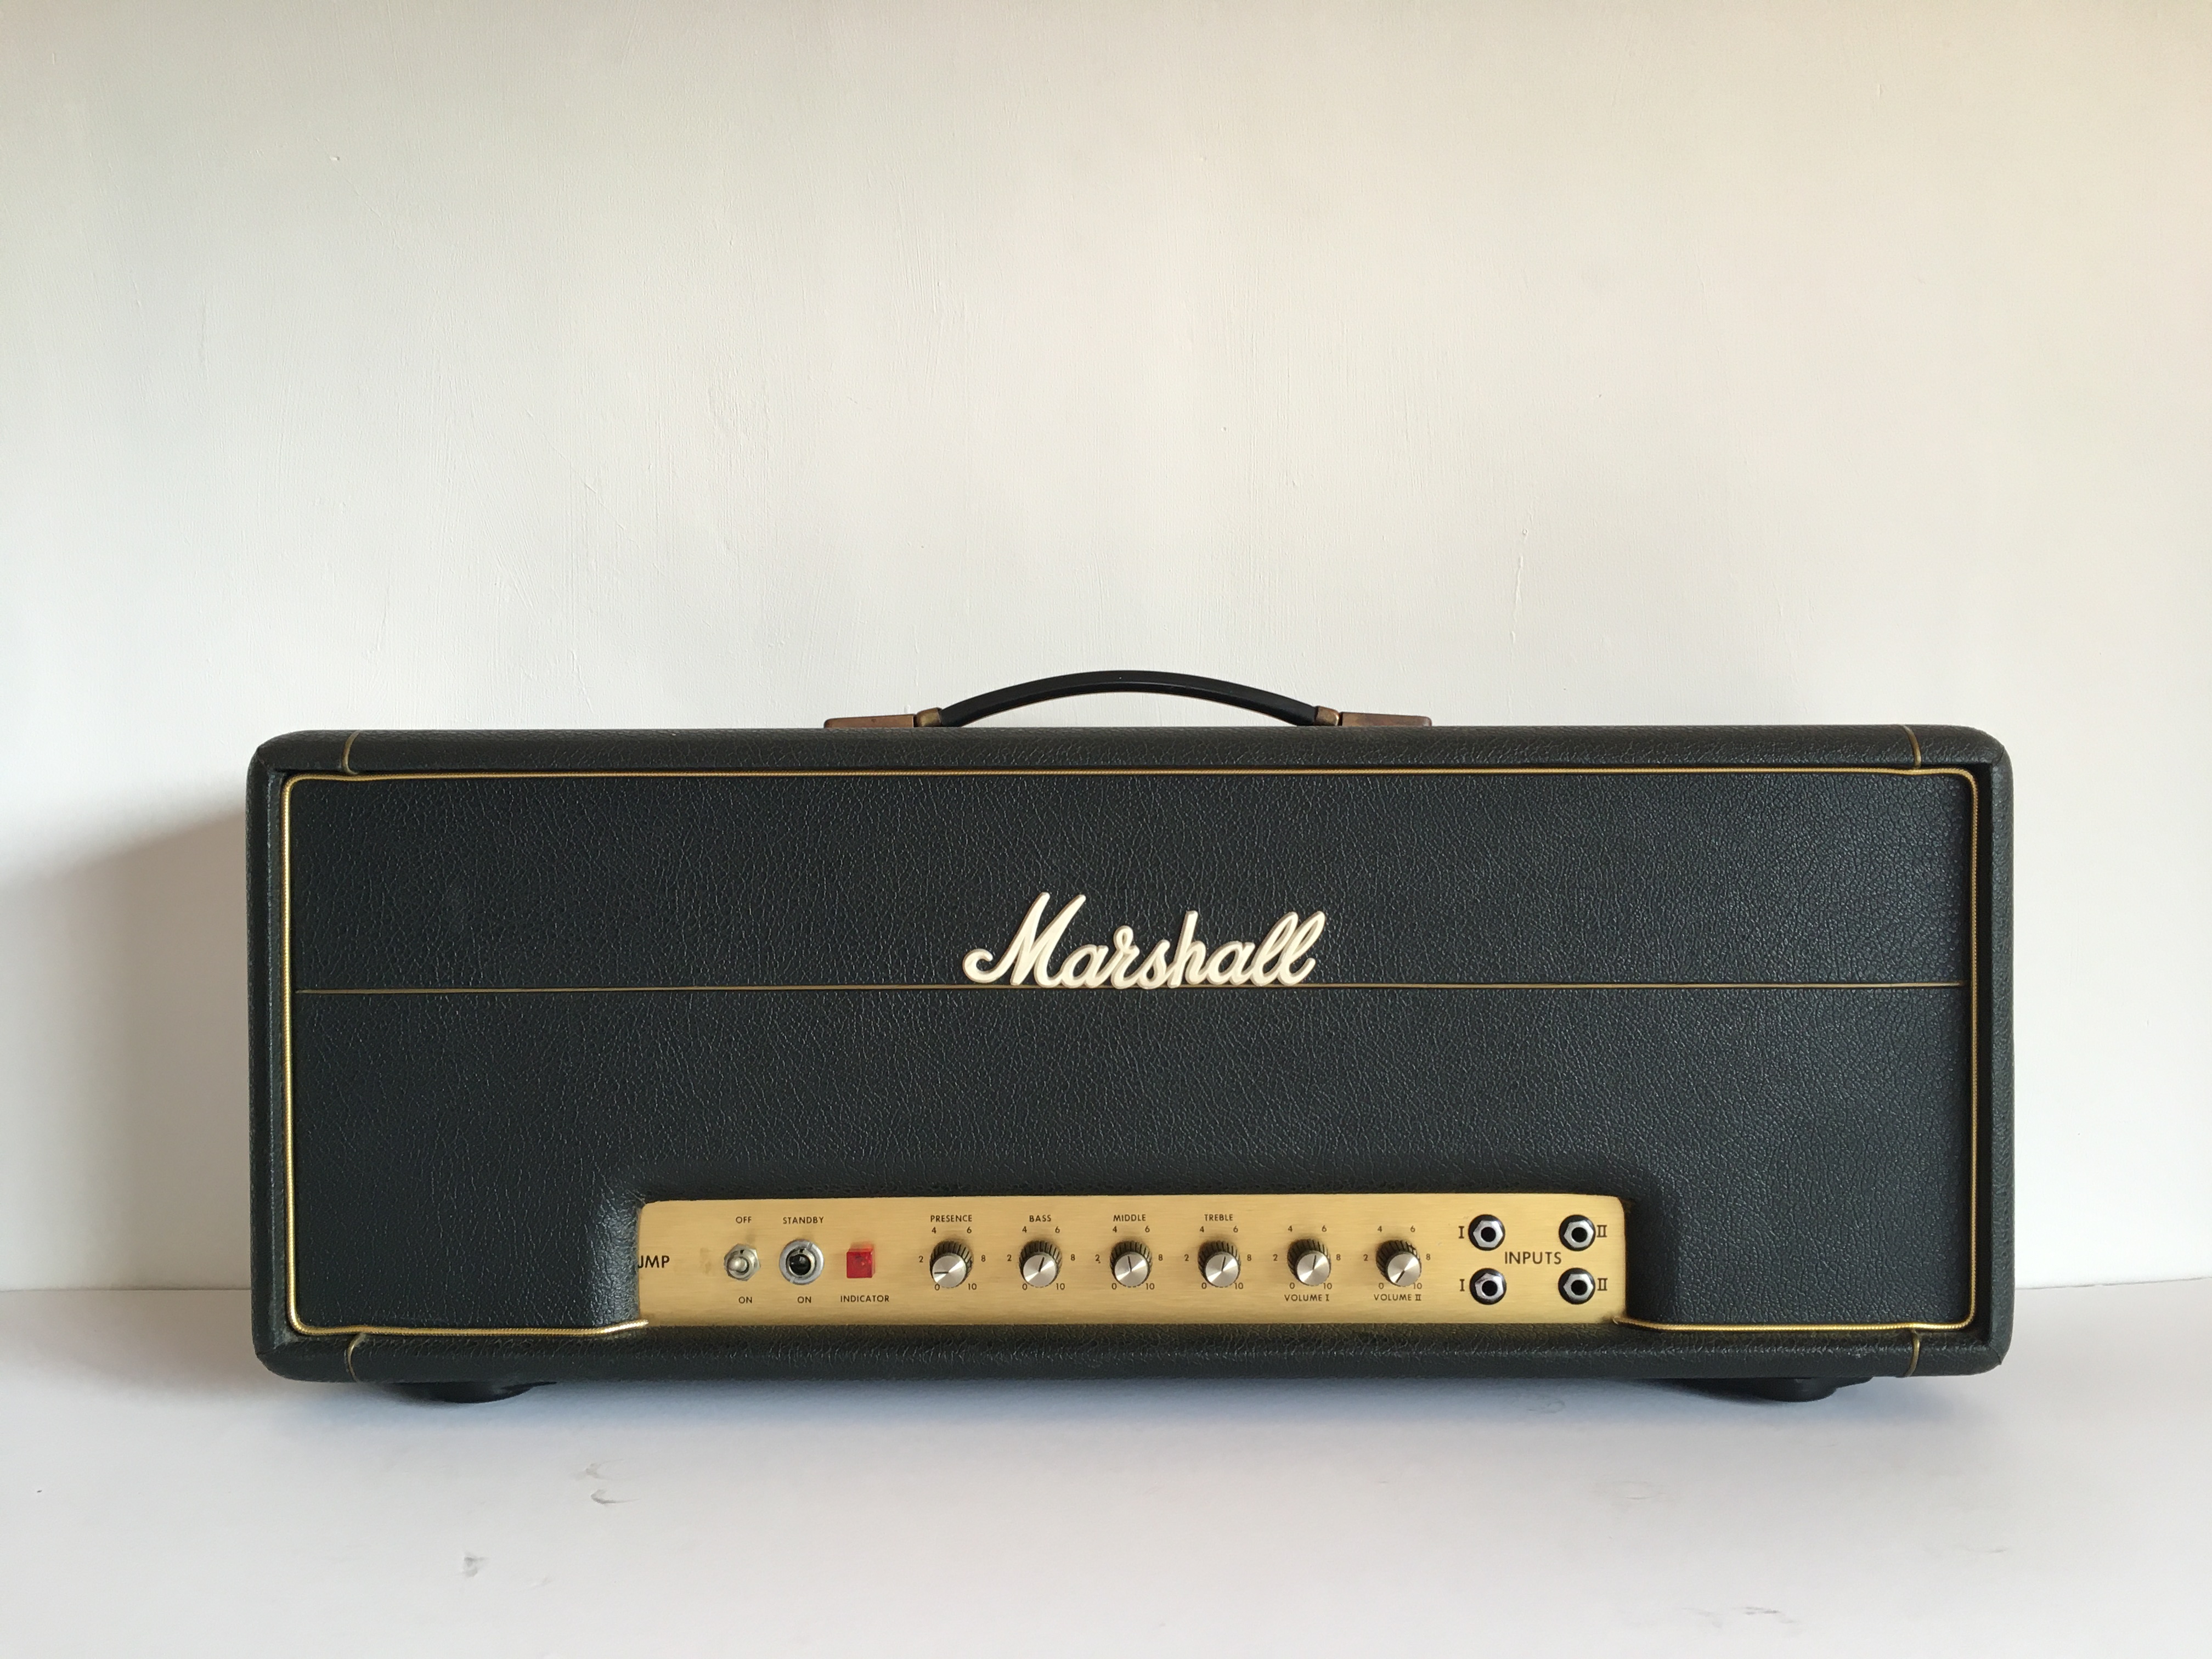 Marshall amplifier serial numbers made simple | Amp Archives